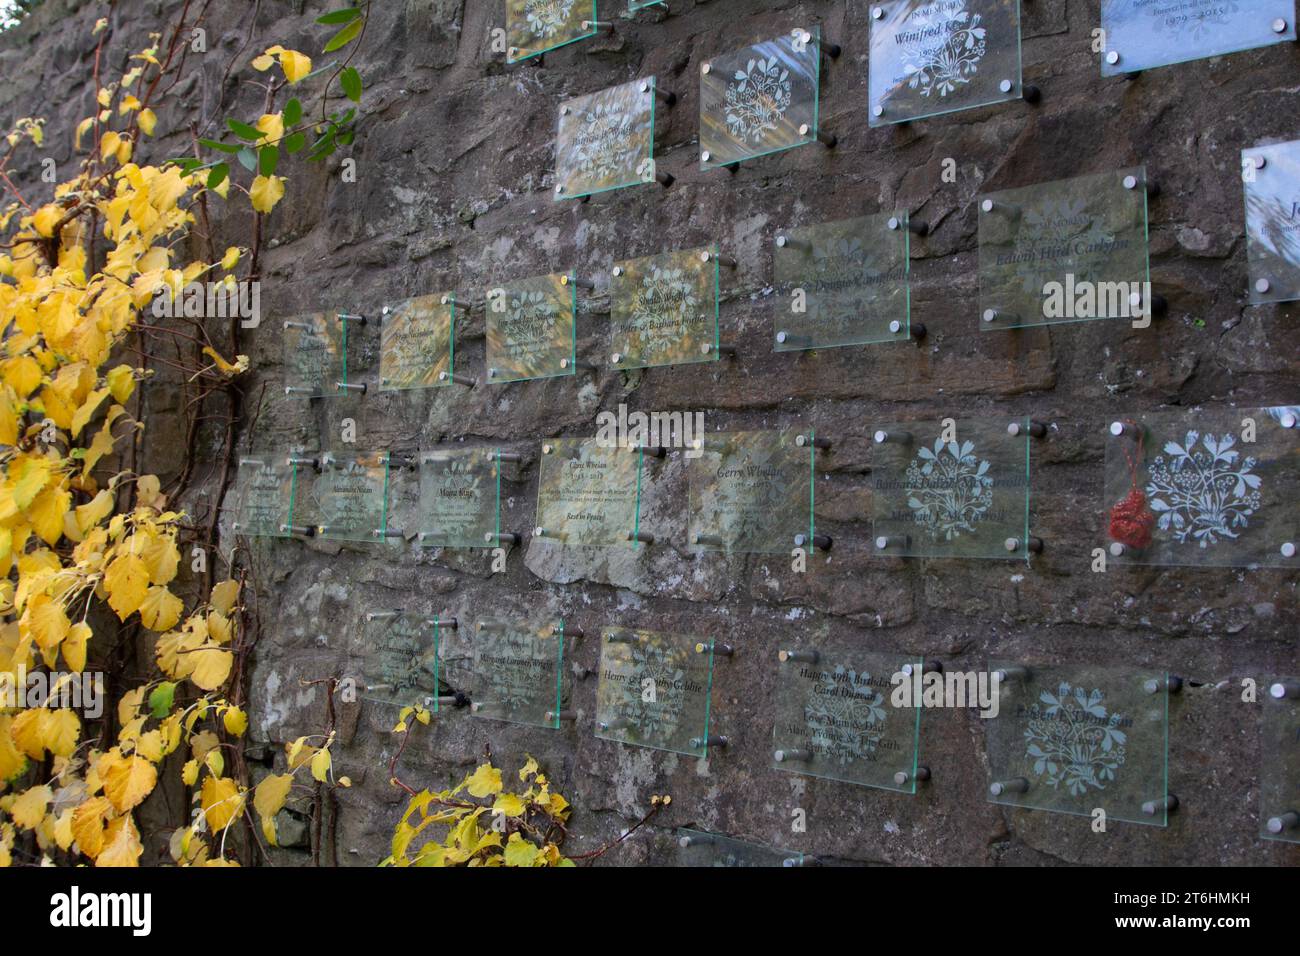 Edinburgh, the plaques commemorating loved ones and special occasions remain for 10 years in the Memory Garden of the Royal Botanic Garden. Stock Photo